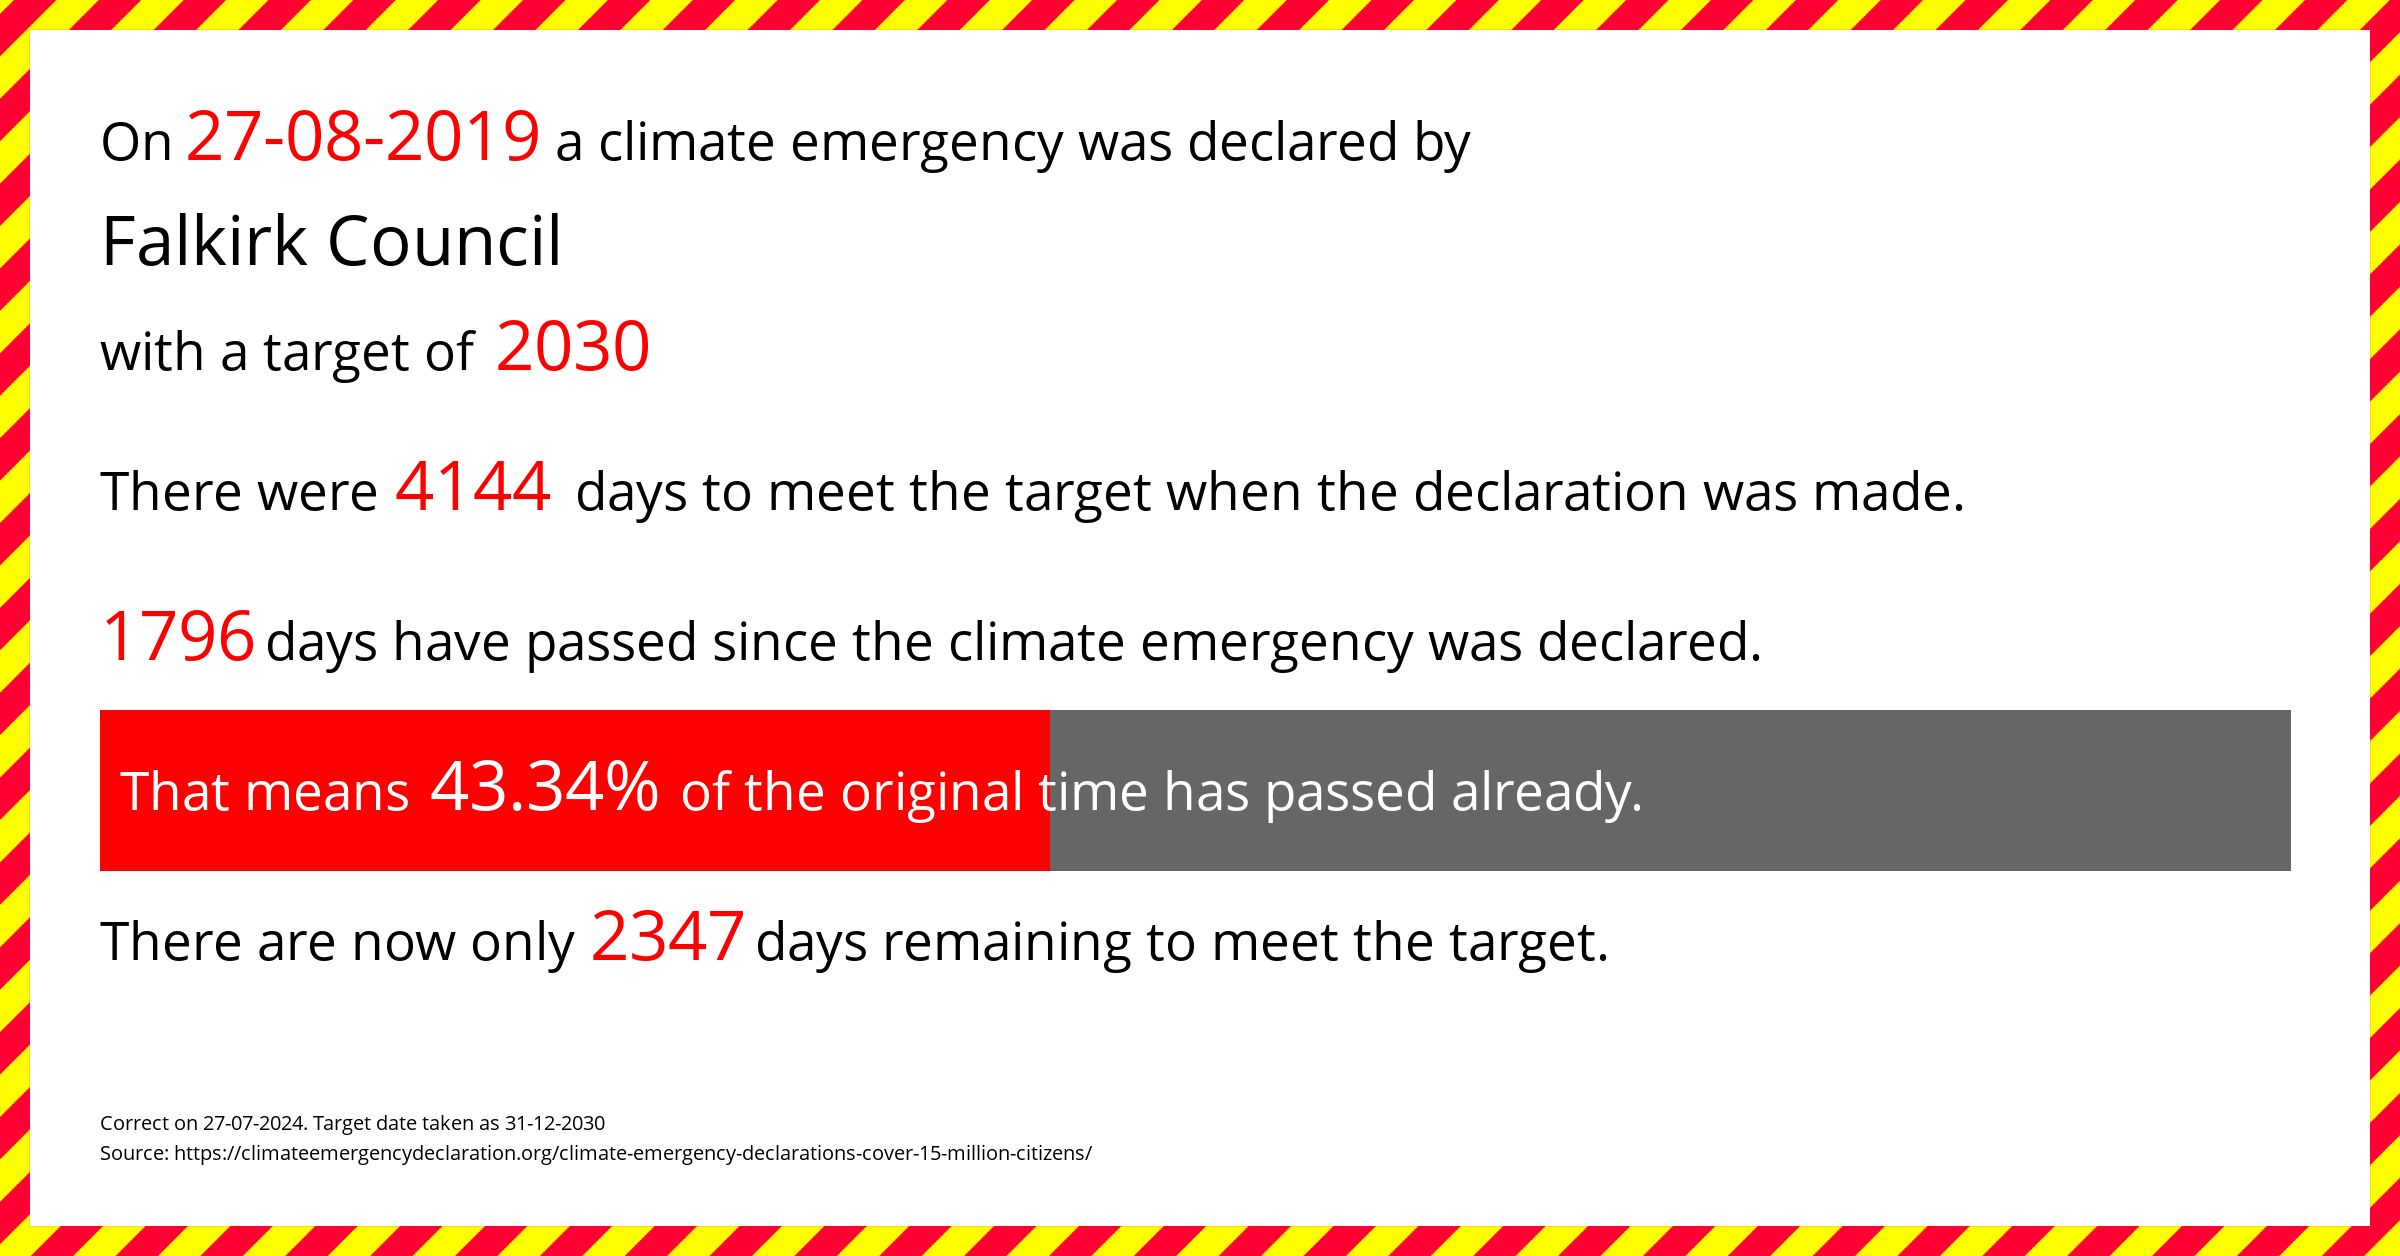 Falkirk Council declared a Climate emergency on Tuesday 27th August 2019, with a target of 2030.